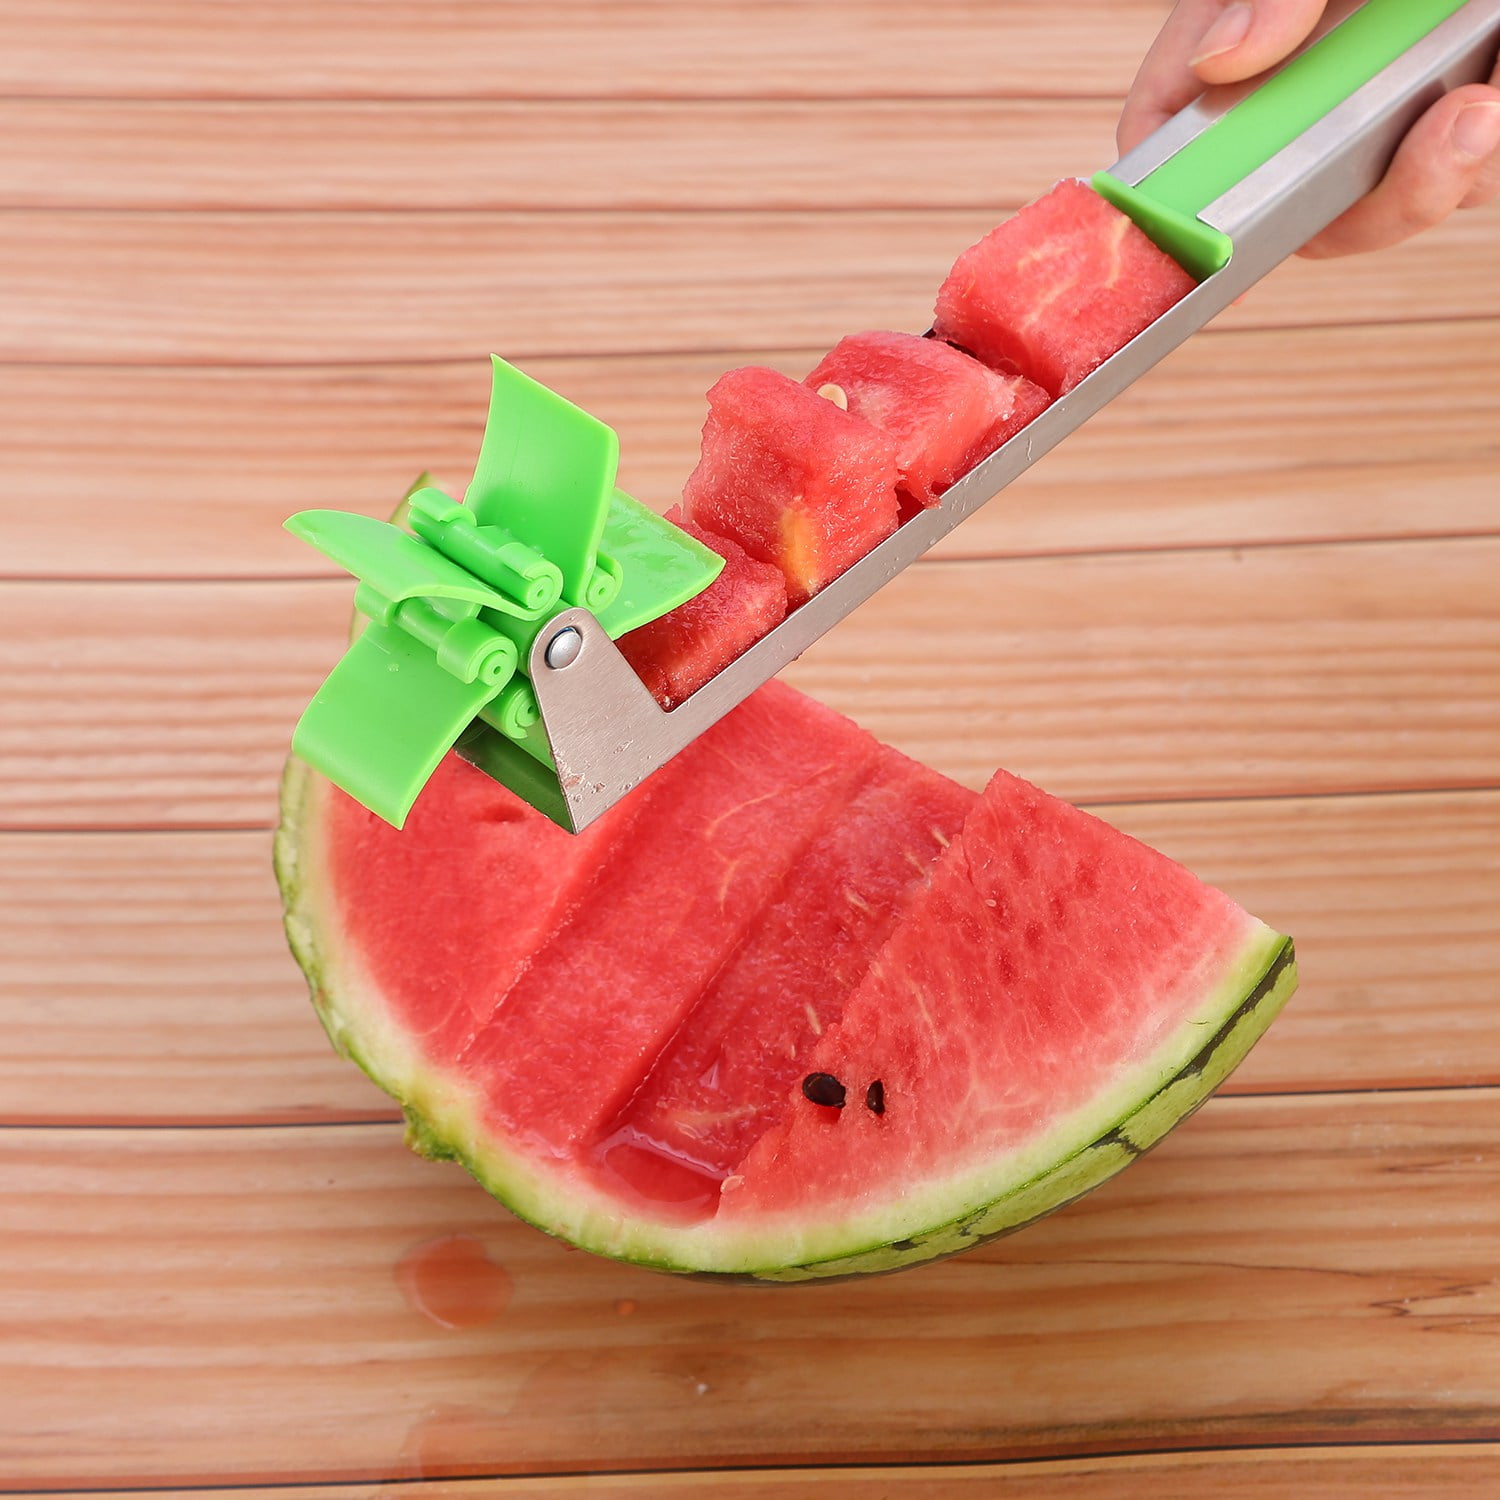 Fruit Cutting Tool Watermelon Windmill Cutter Cantaloupe Watermelon Dicer CJMING Watermelon Cutter Stainless Steel Fruit Slicer BPA Free 